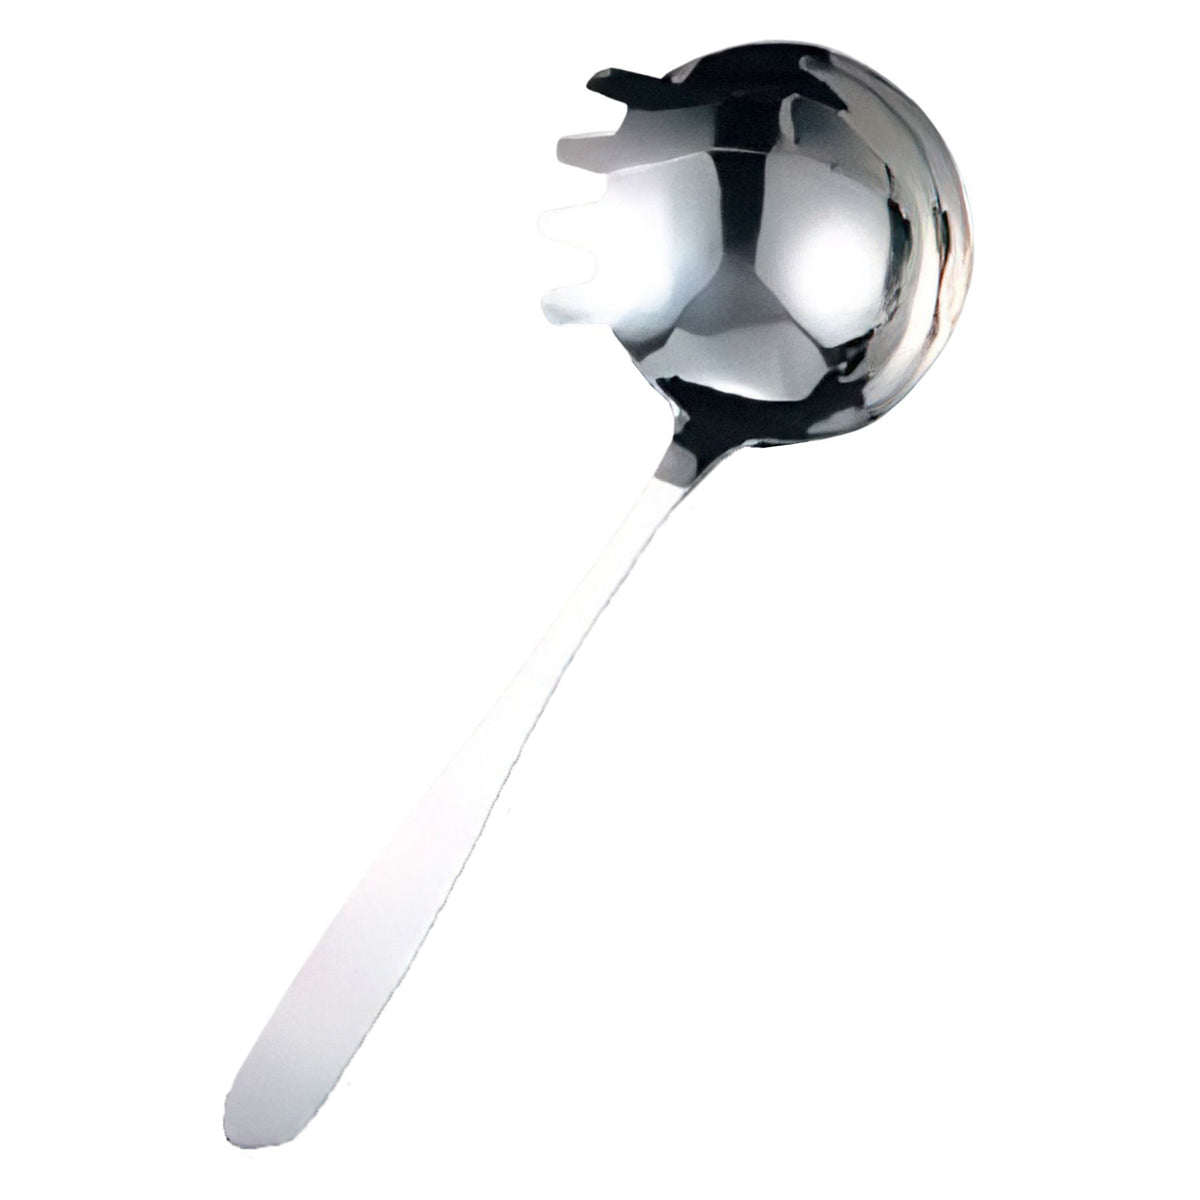 Nonoji Stainless Steel Comb-Shaped Ladle